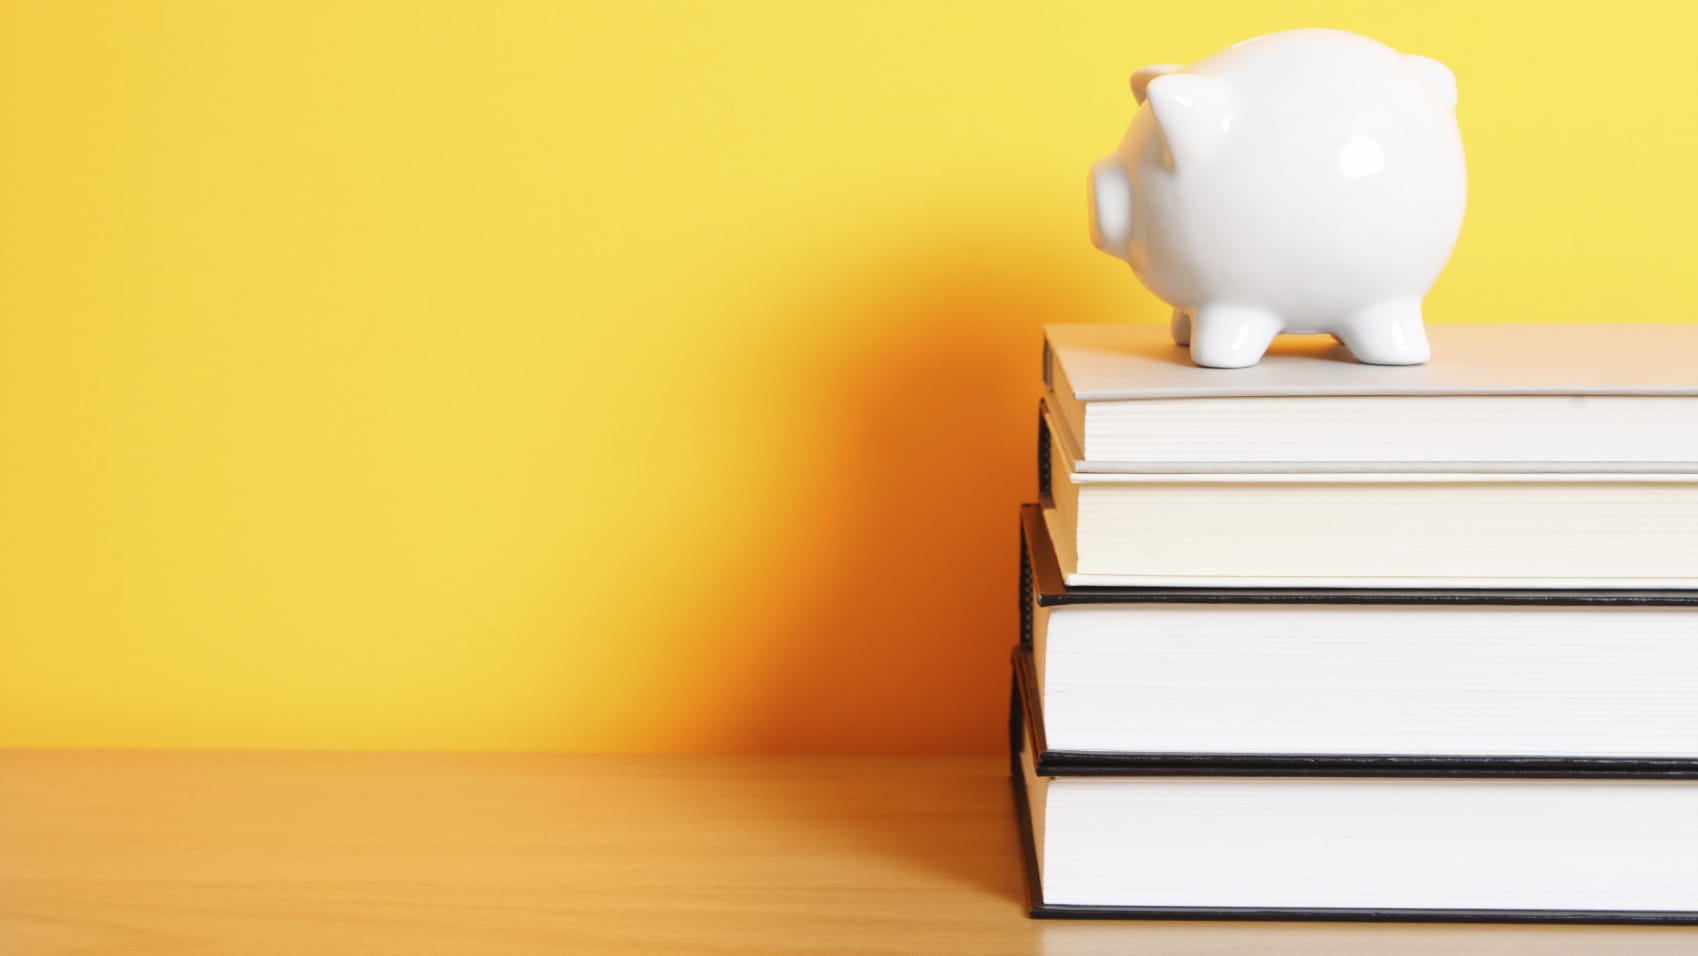 Piggy bank on books with yellow background